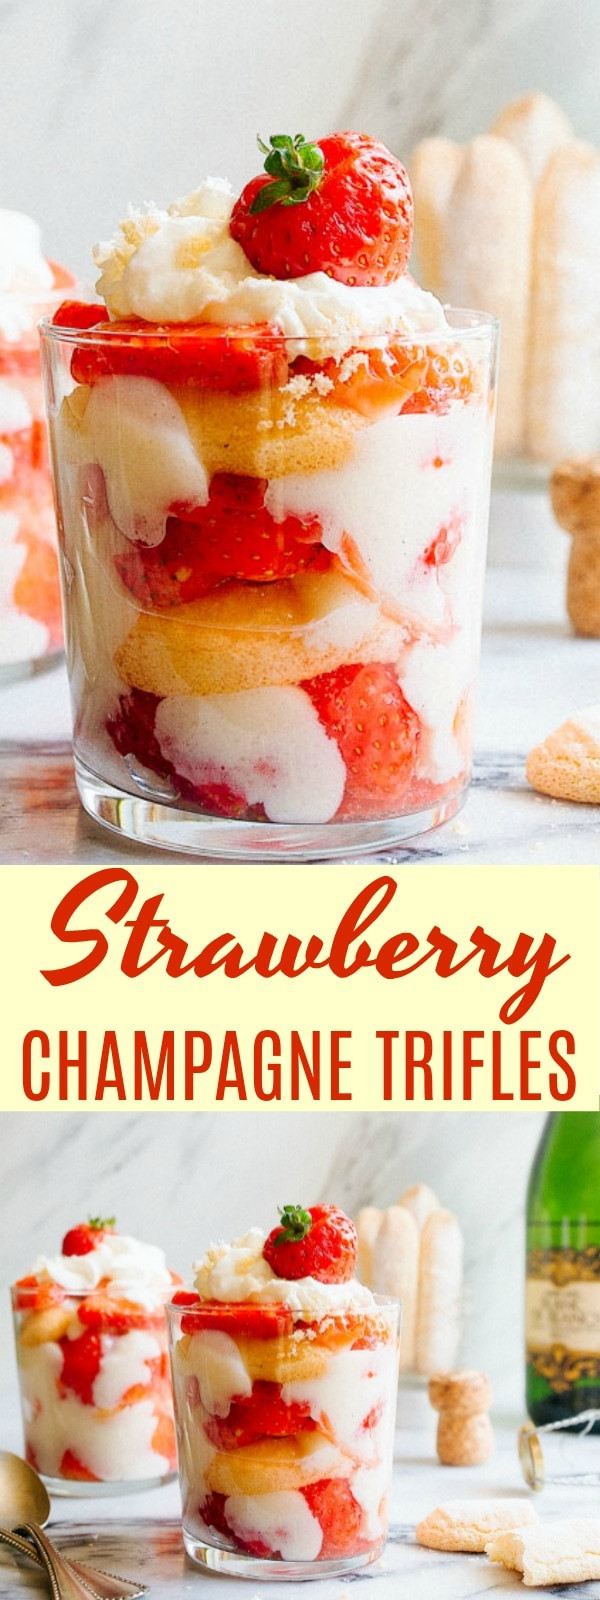 New Year'S Day Desserts
 Strawberry Champagne Trifles for Two